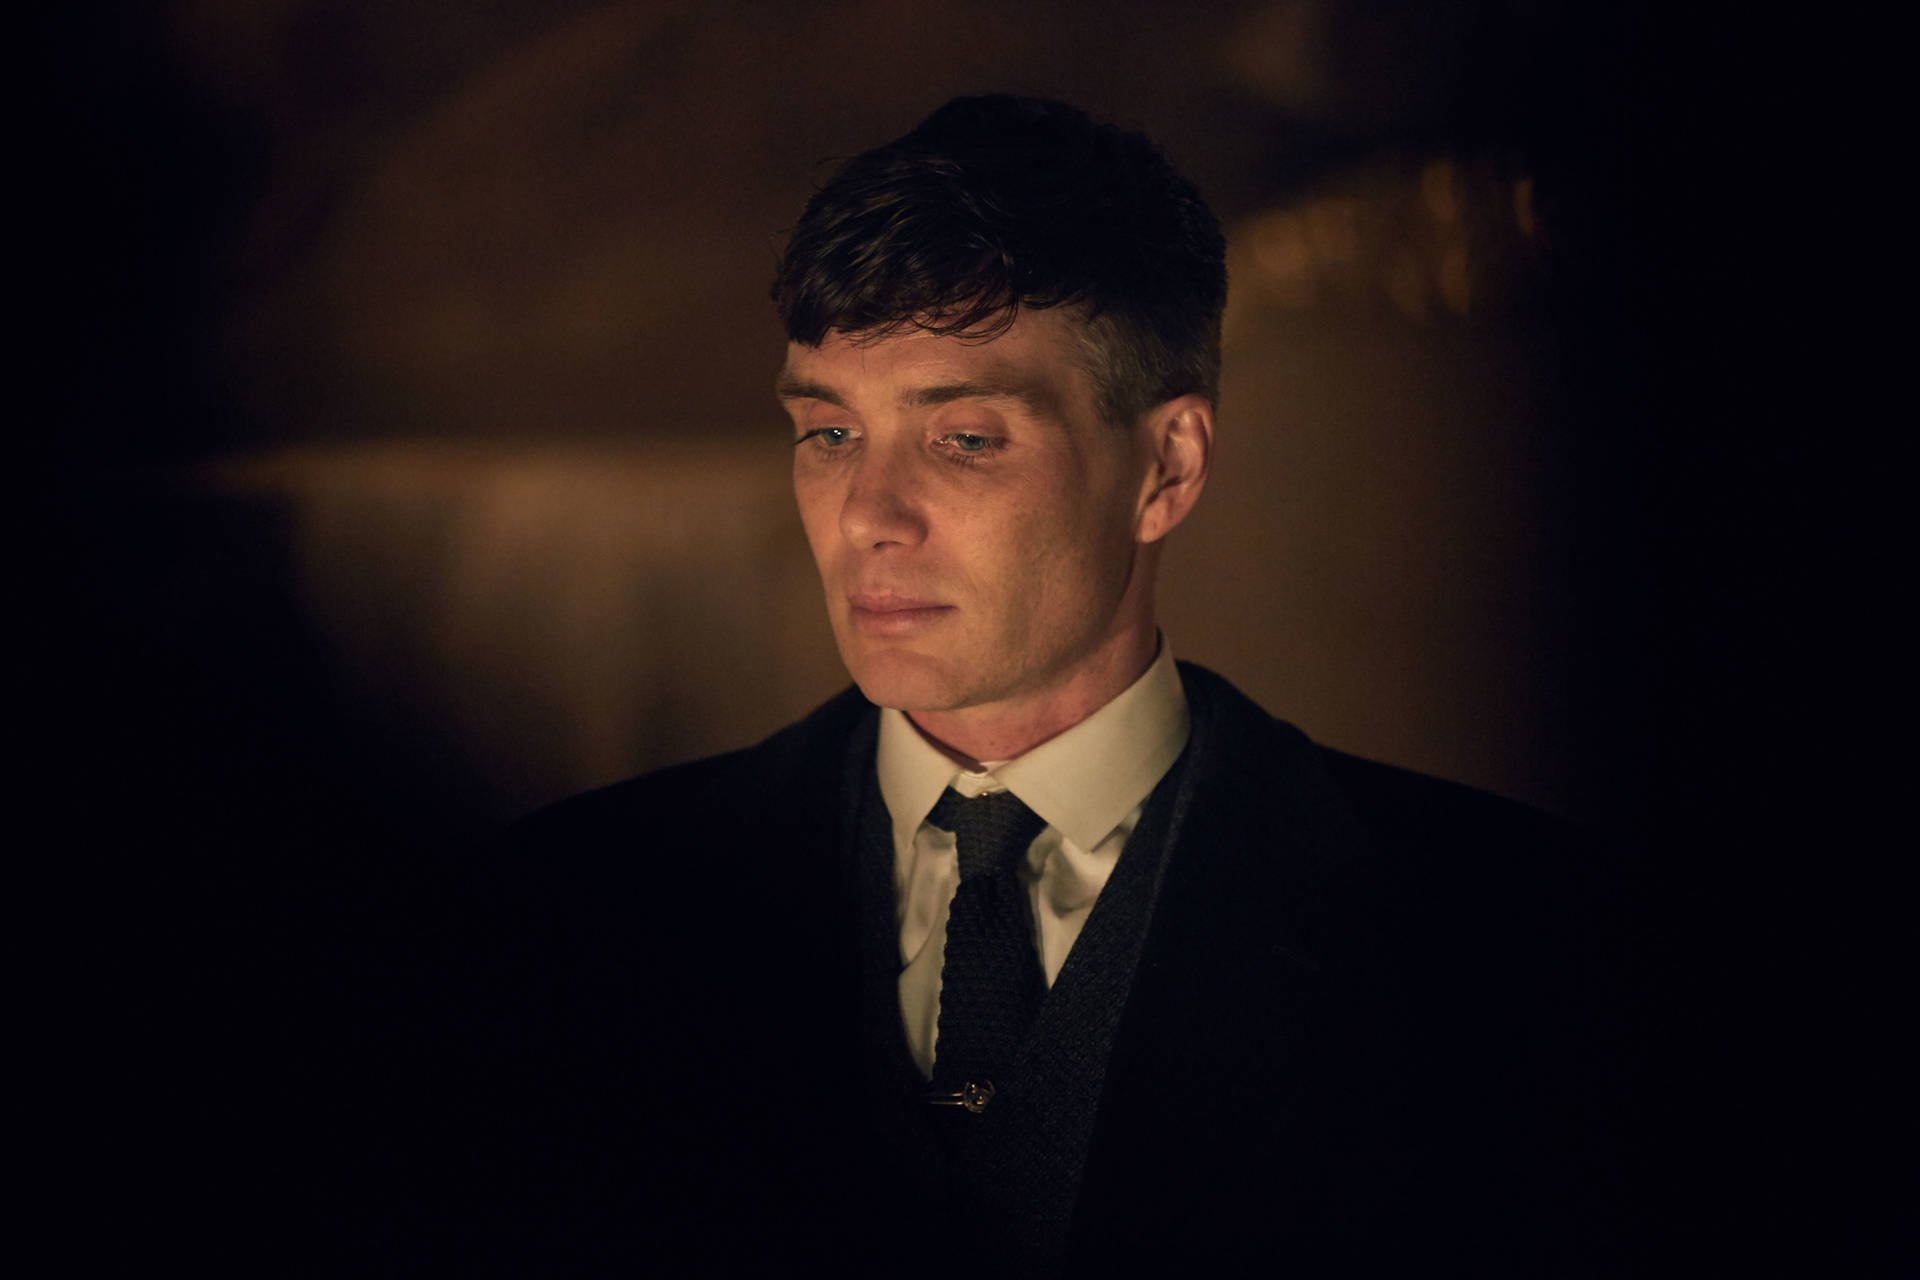 Thomas Shelby Wallpapers - Top 30 Best Thomas Shelby Wallpapers Download